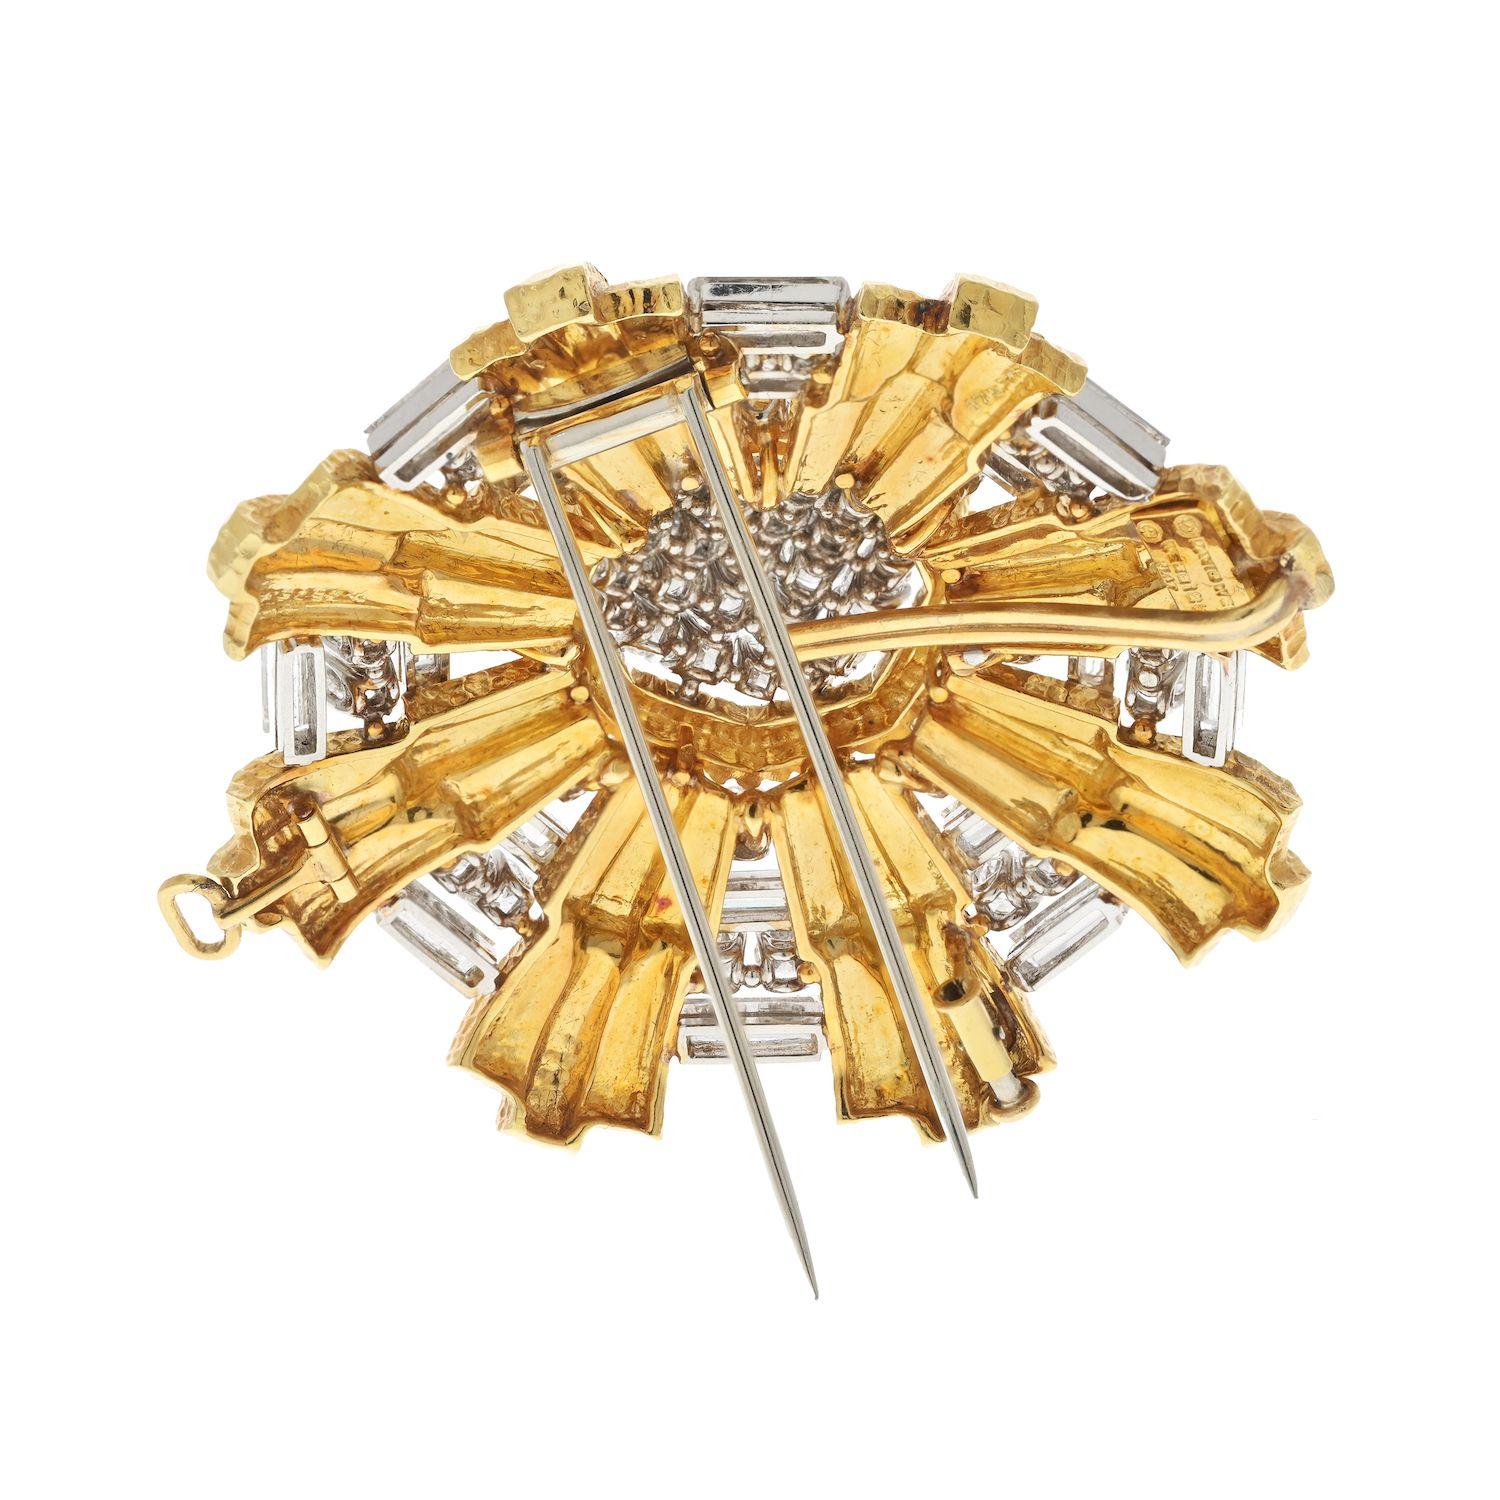 This Heraldic design brooch by David Webb is a remarkable piece in exceptional condition, especially considering its age. Crafted with meticulous attention to detail, the brooch features a stunning combination of baguette and round-cut diamonds,